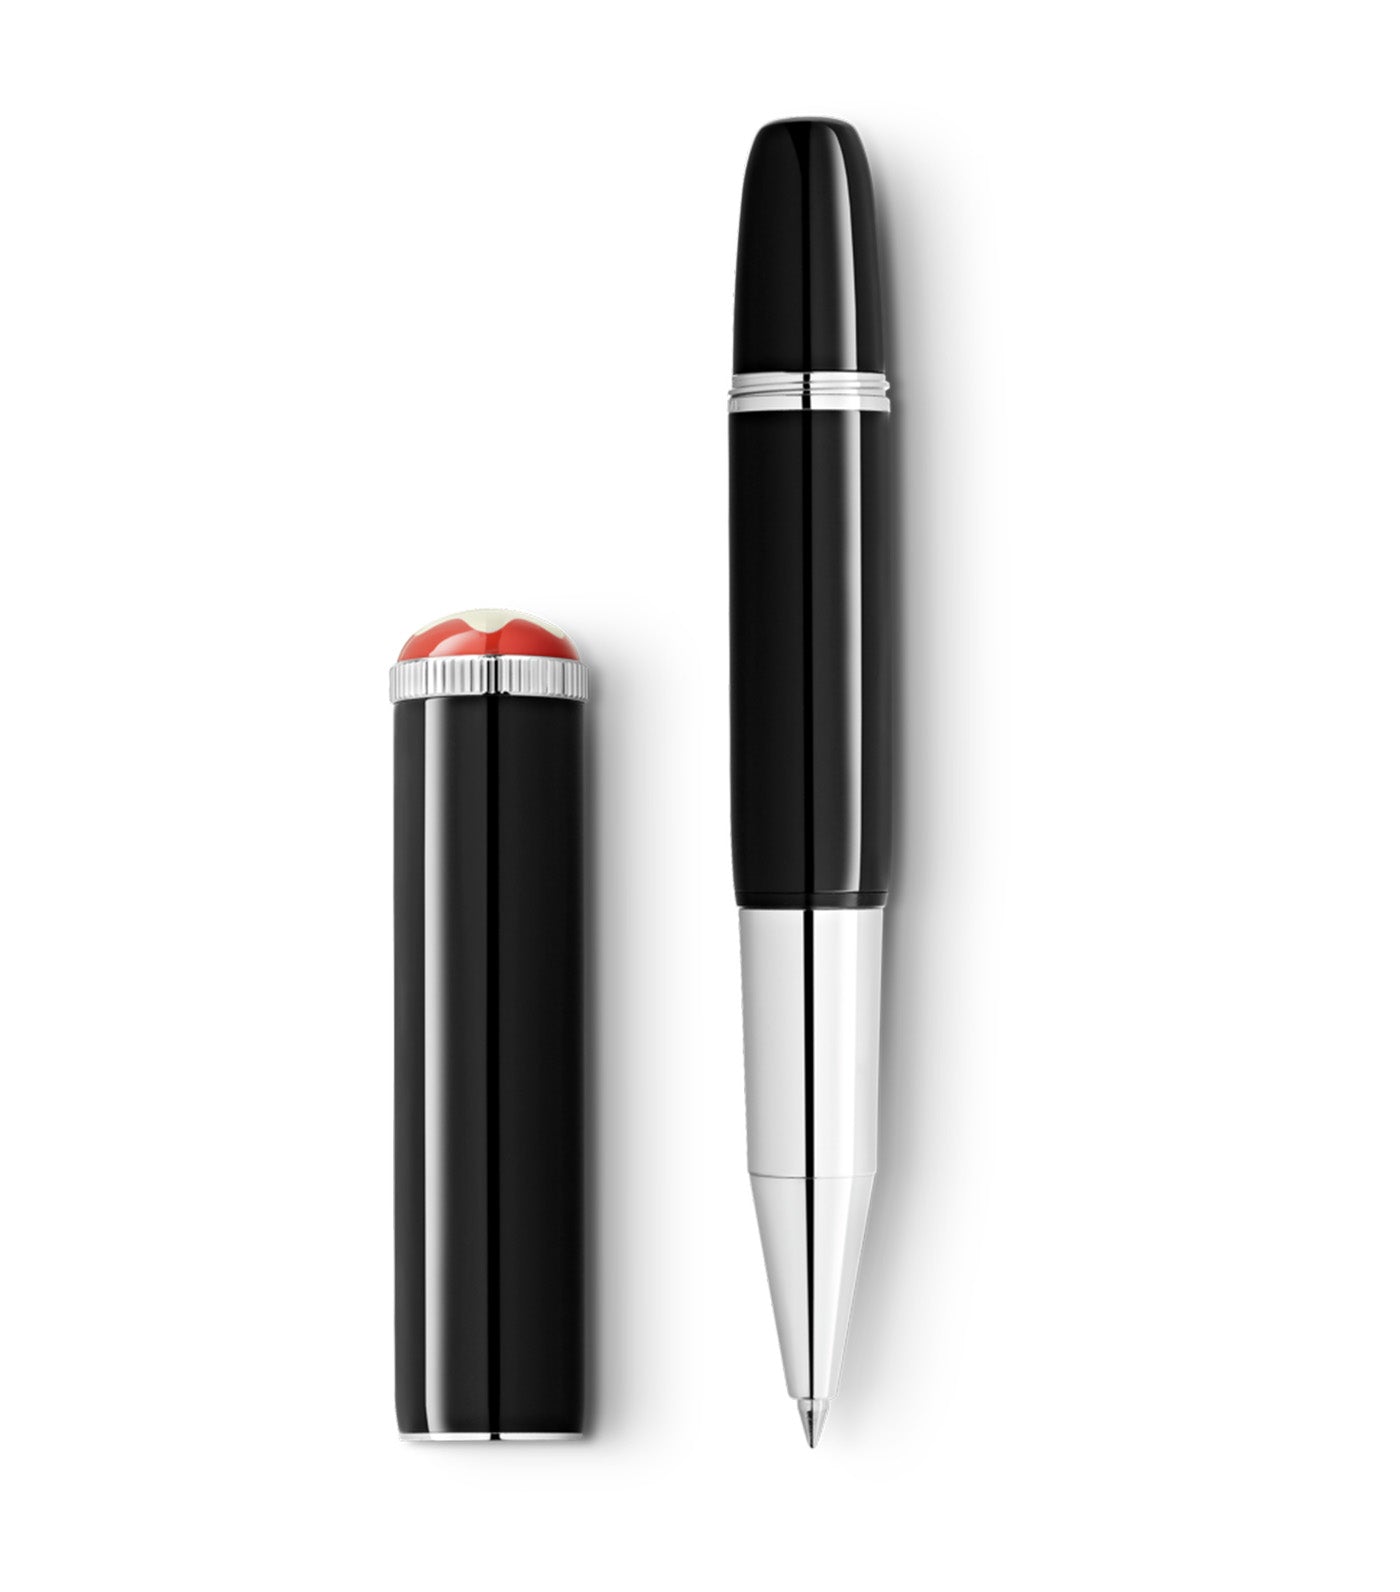 Heritage Rouge et Noir "Baby" Special Edition Rollerball Black